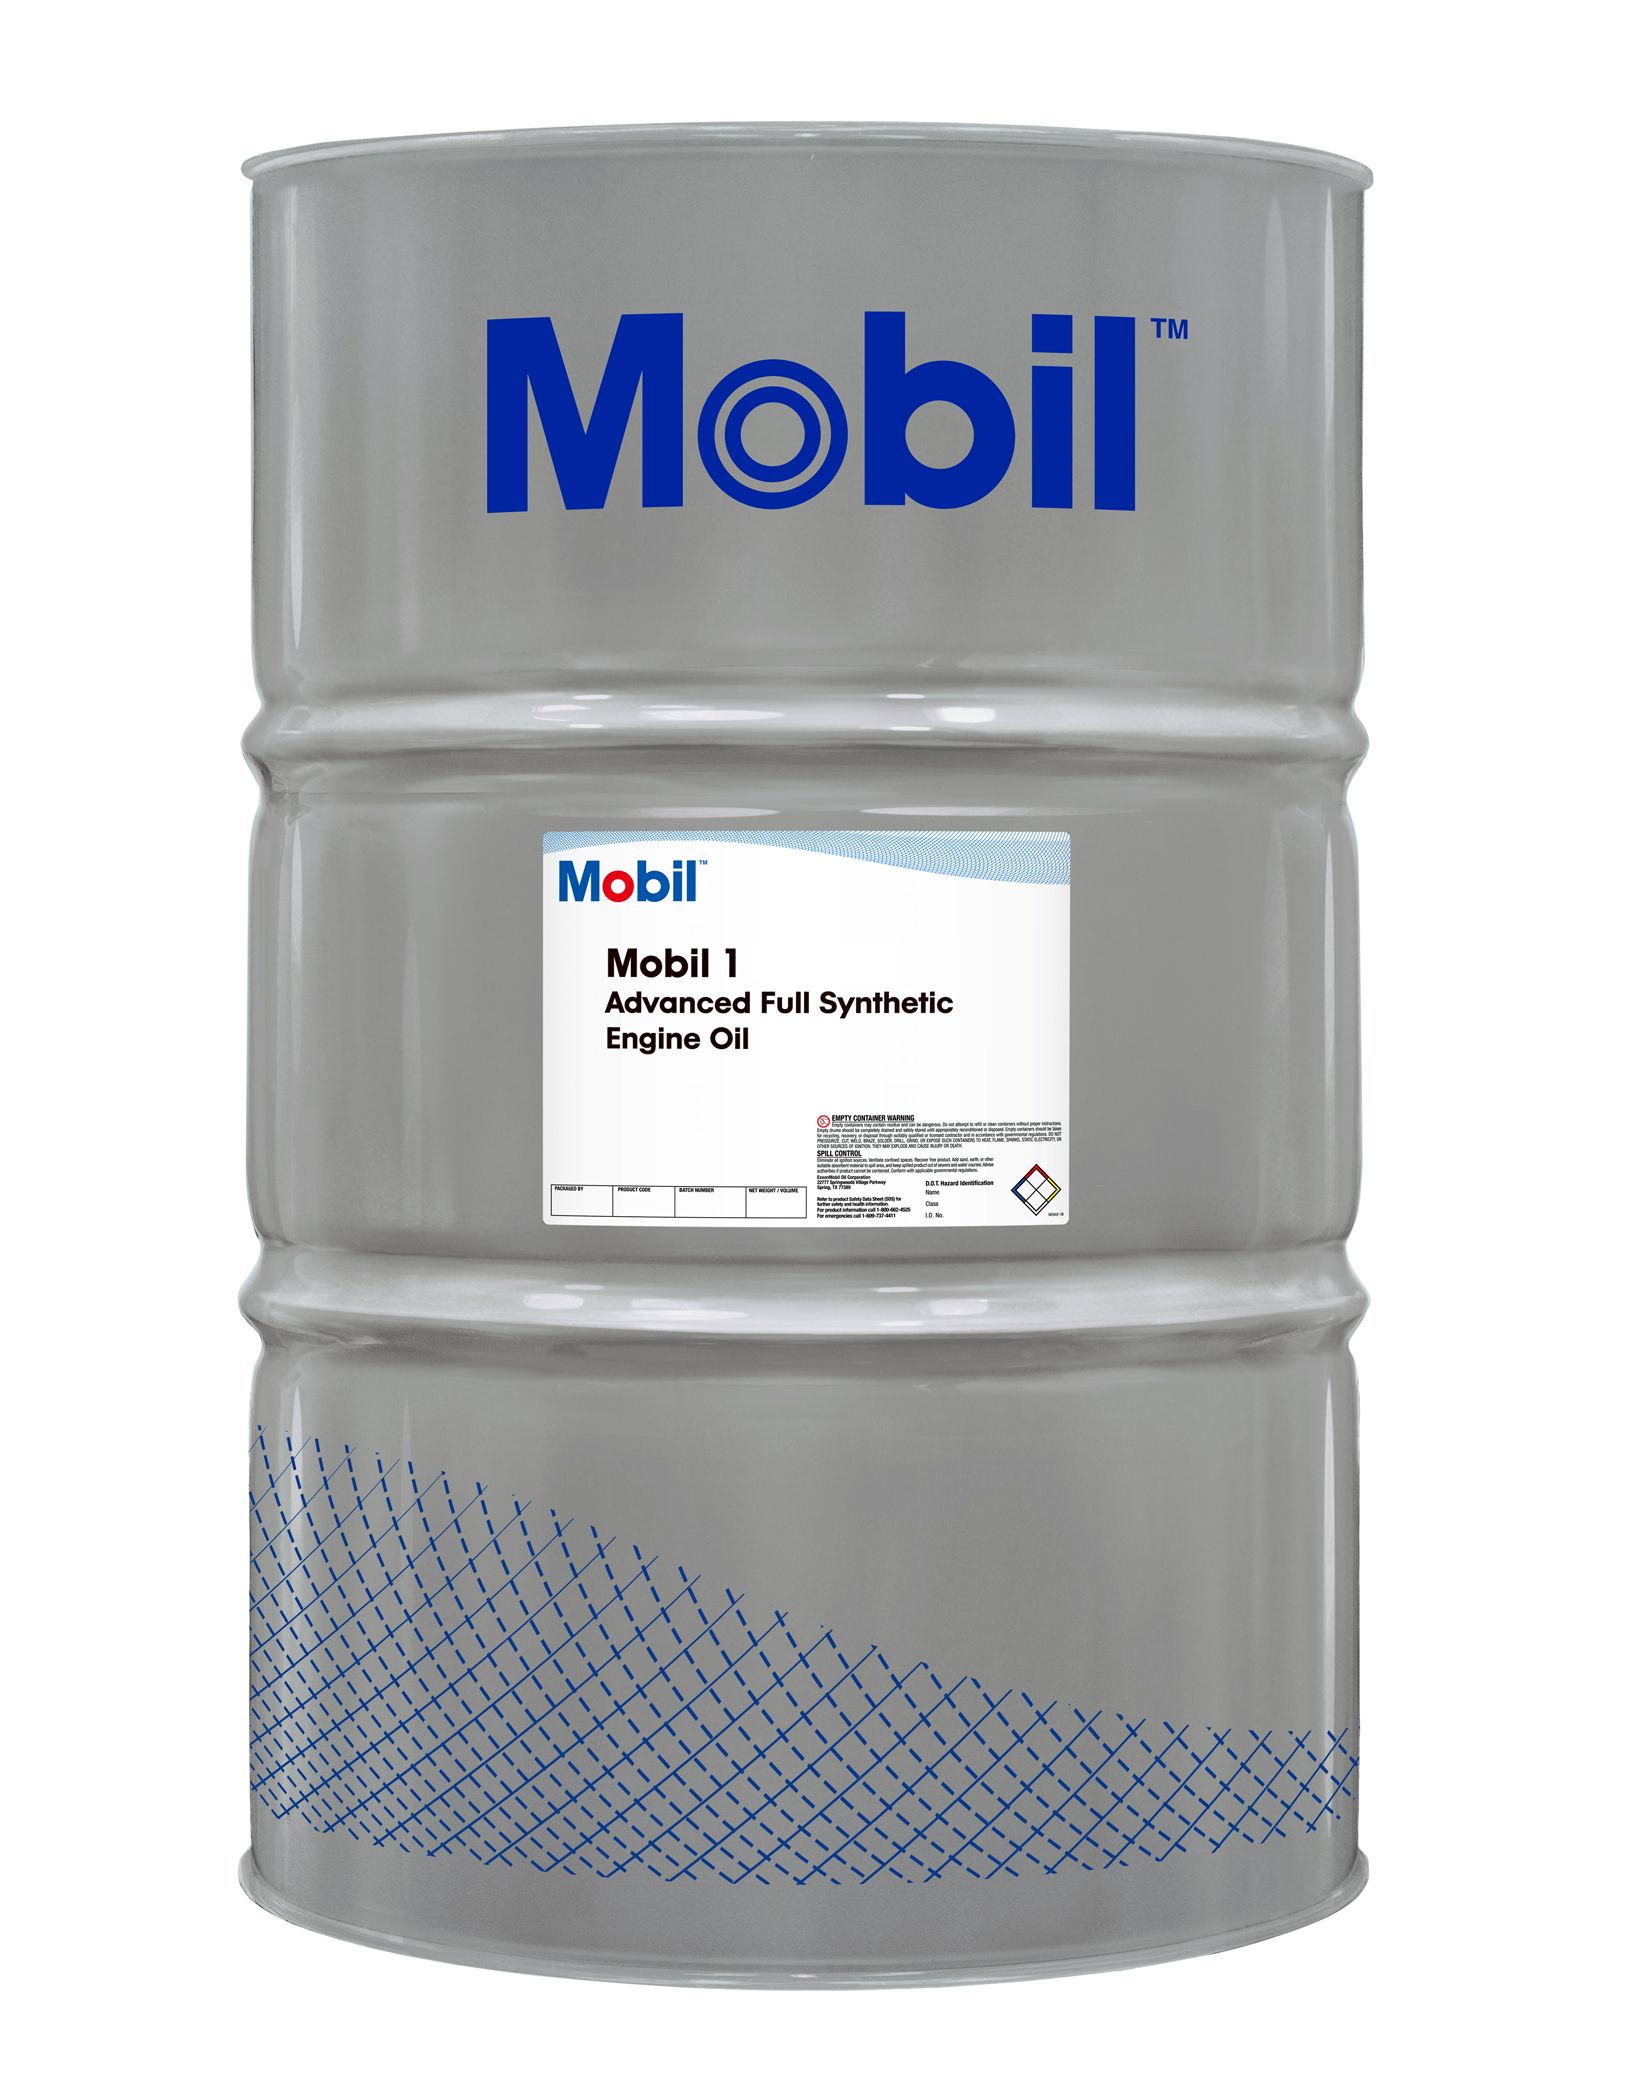 MOBIL 1 5W-20 100% SYNTHETIC, 55 Gallon Drum